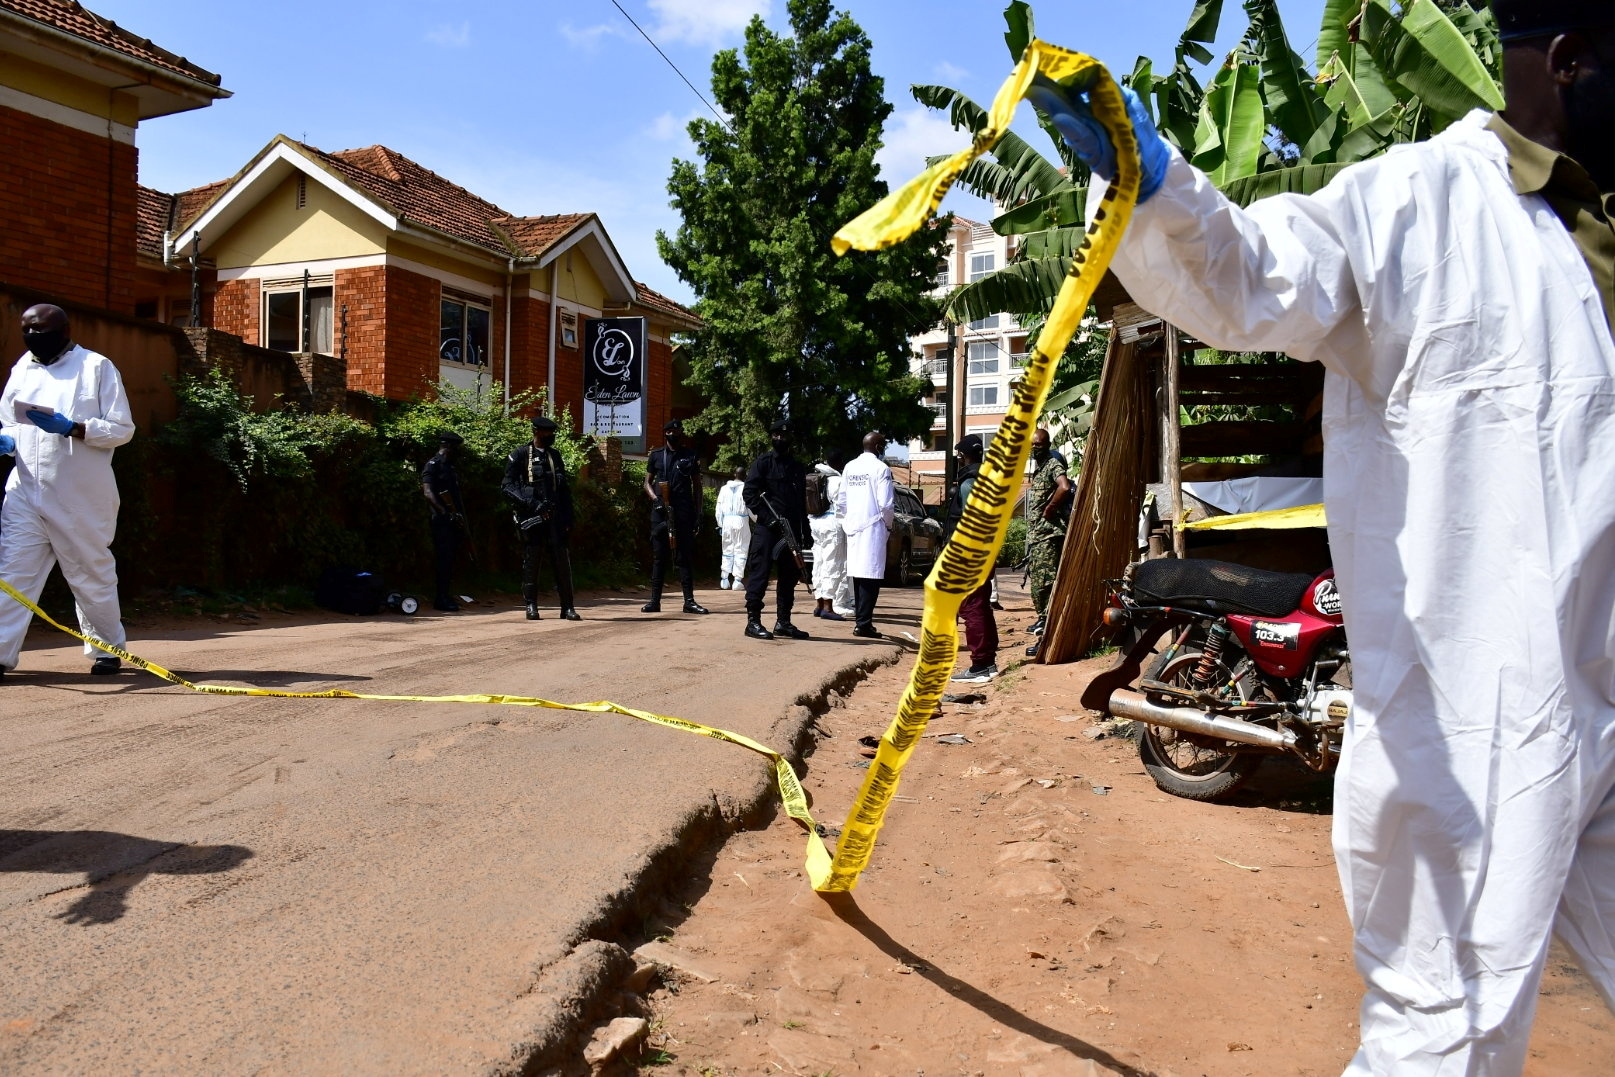 Security forces and forensic experts secure the scene of an attempted assassination on Ugandan minister of works and transport General Katumba Wamala in the suburb of Kiasasi within Kampala, Uganda June 1, 2021. REUTERS/Abubaker Lubowa